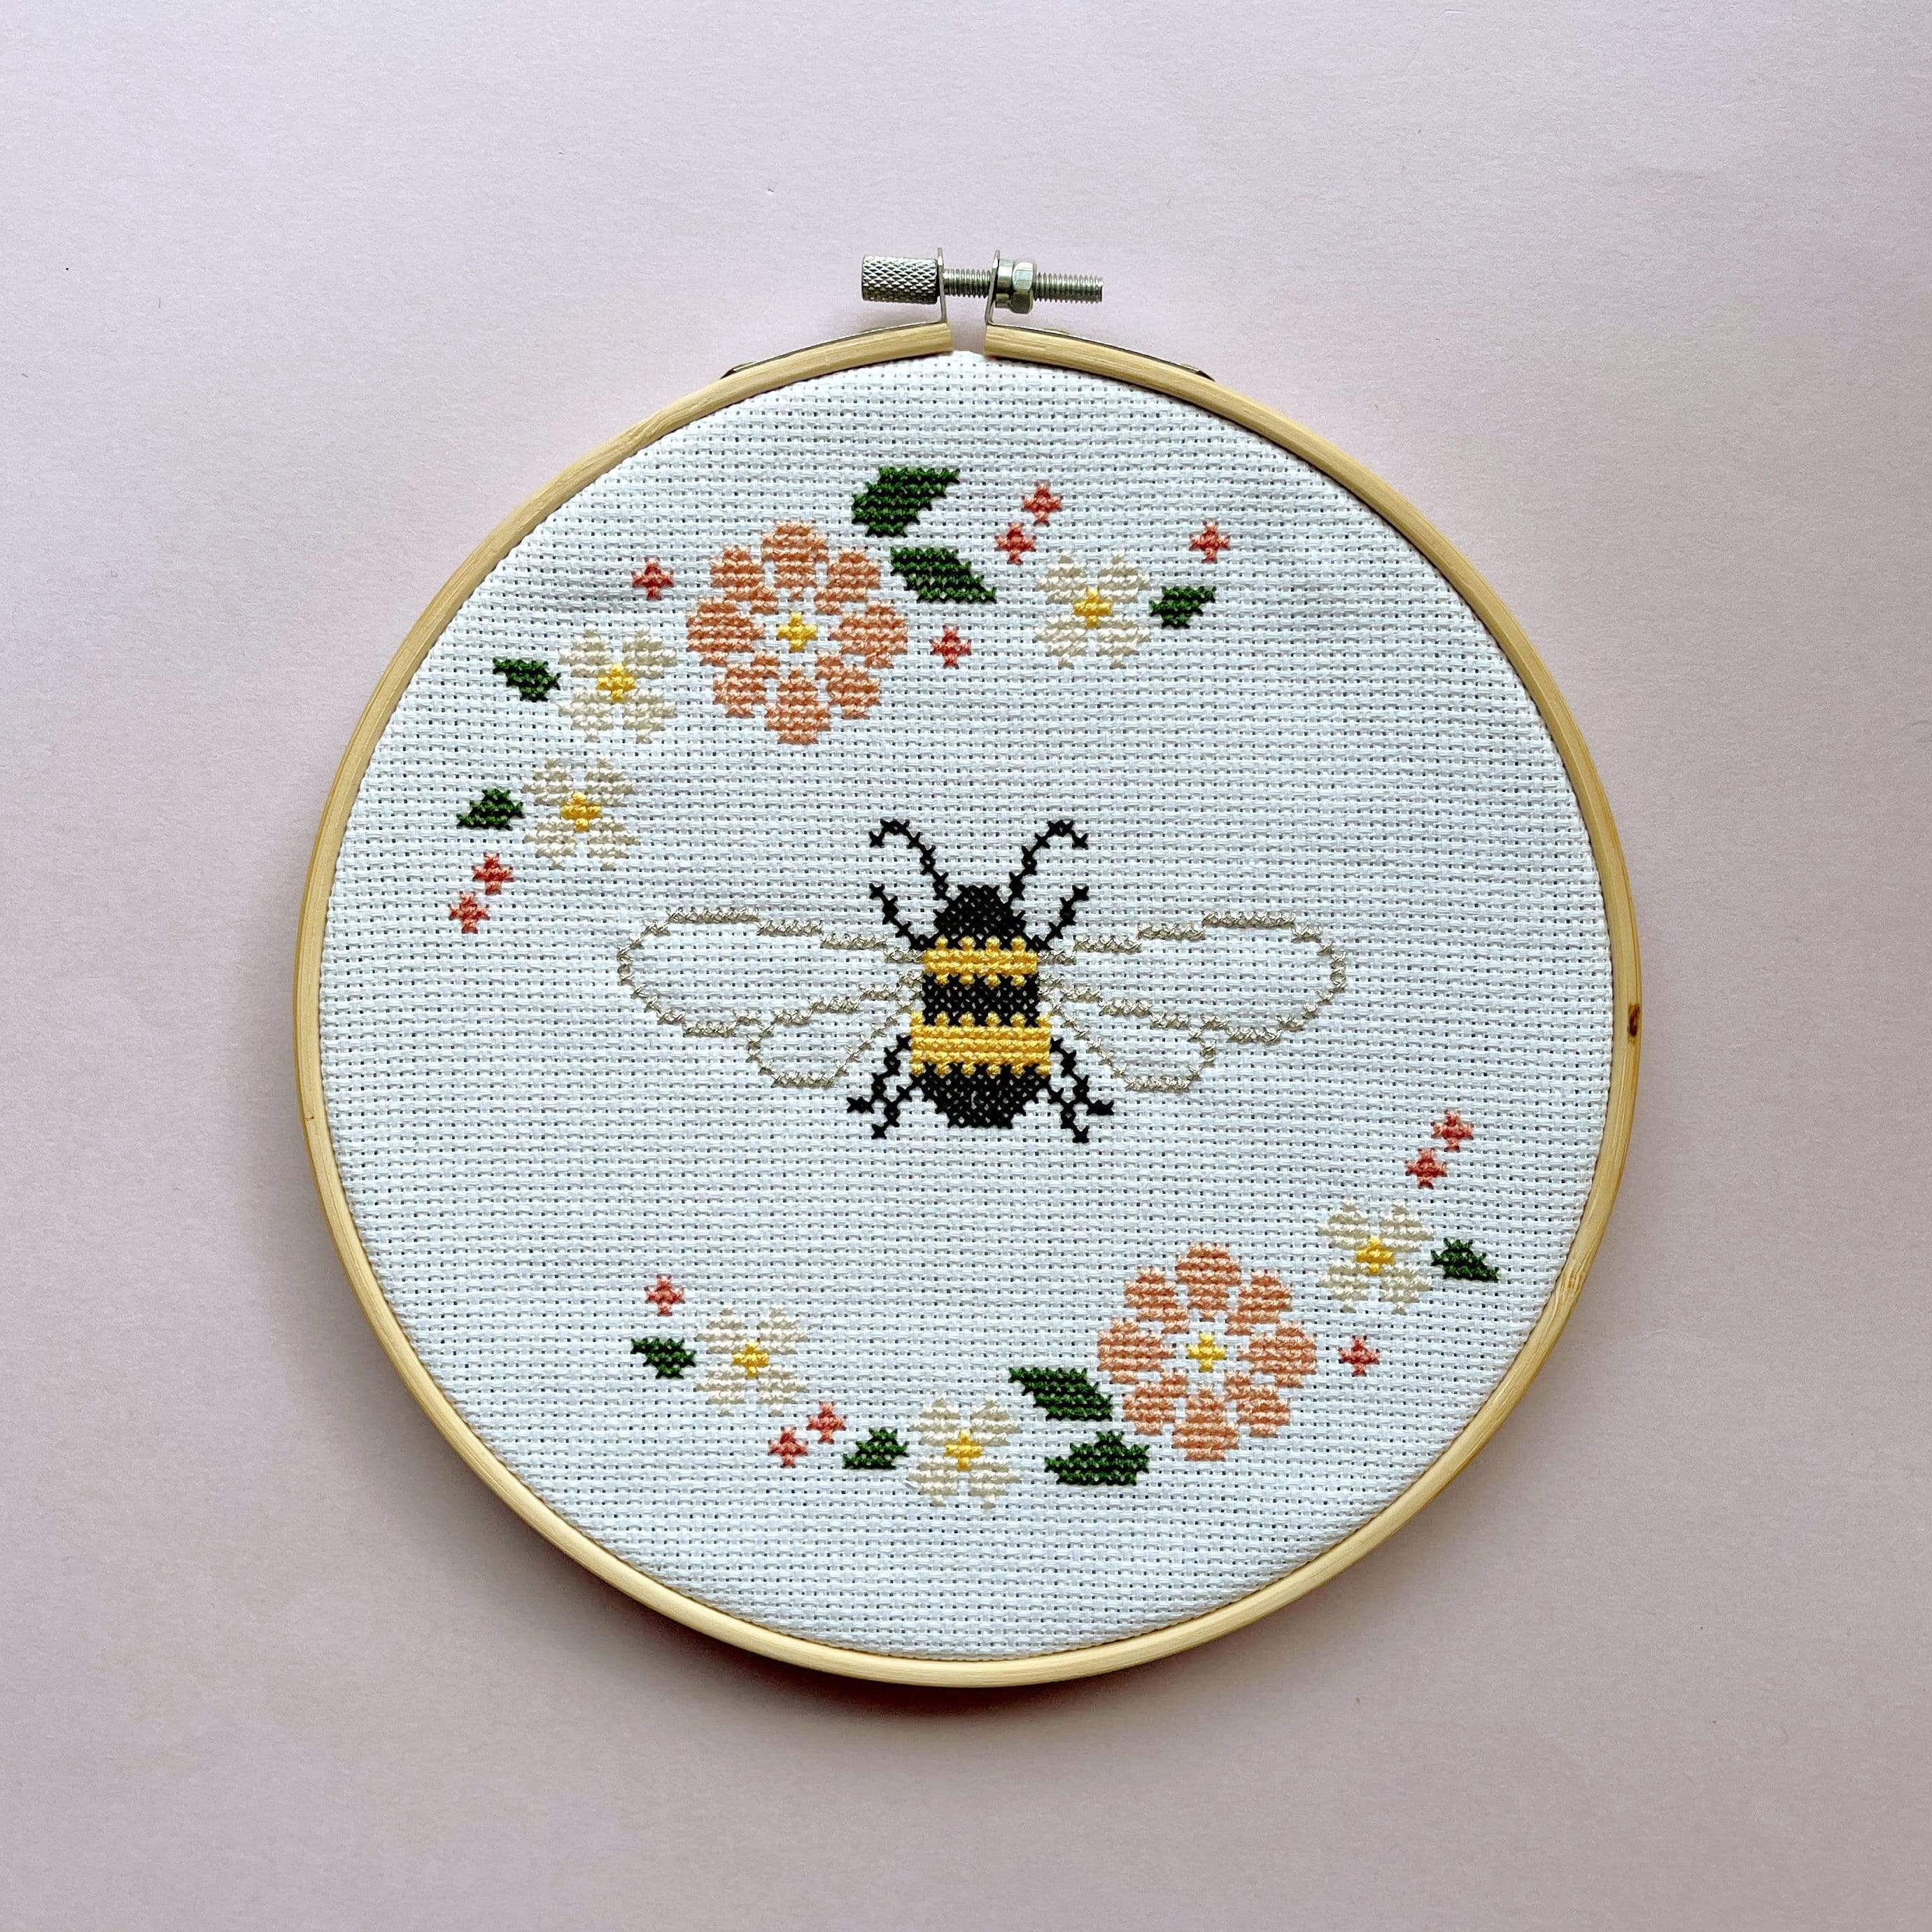 Craft Club Co BEE & BLOSSOM Cross Stitch Kit. The design with a plain light pink background.